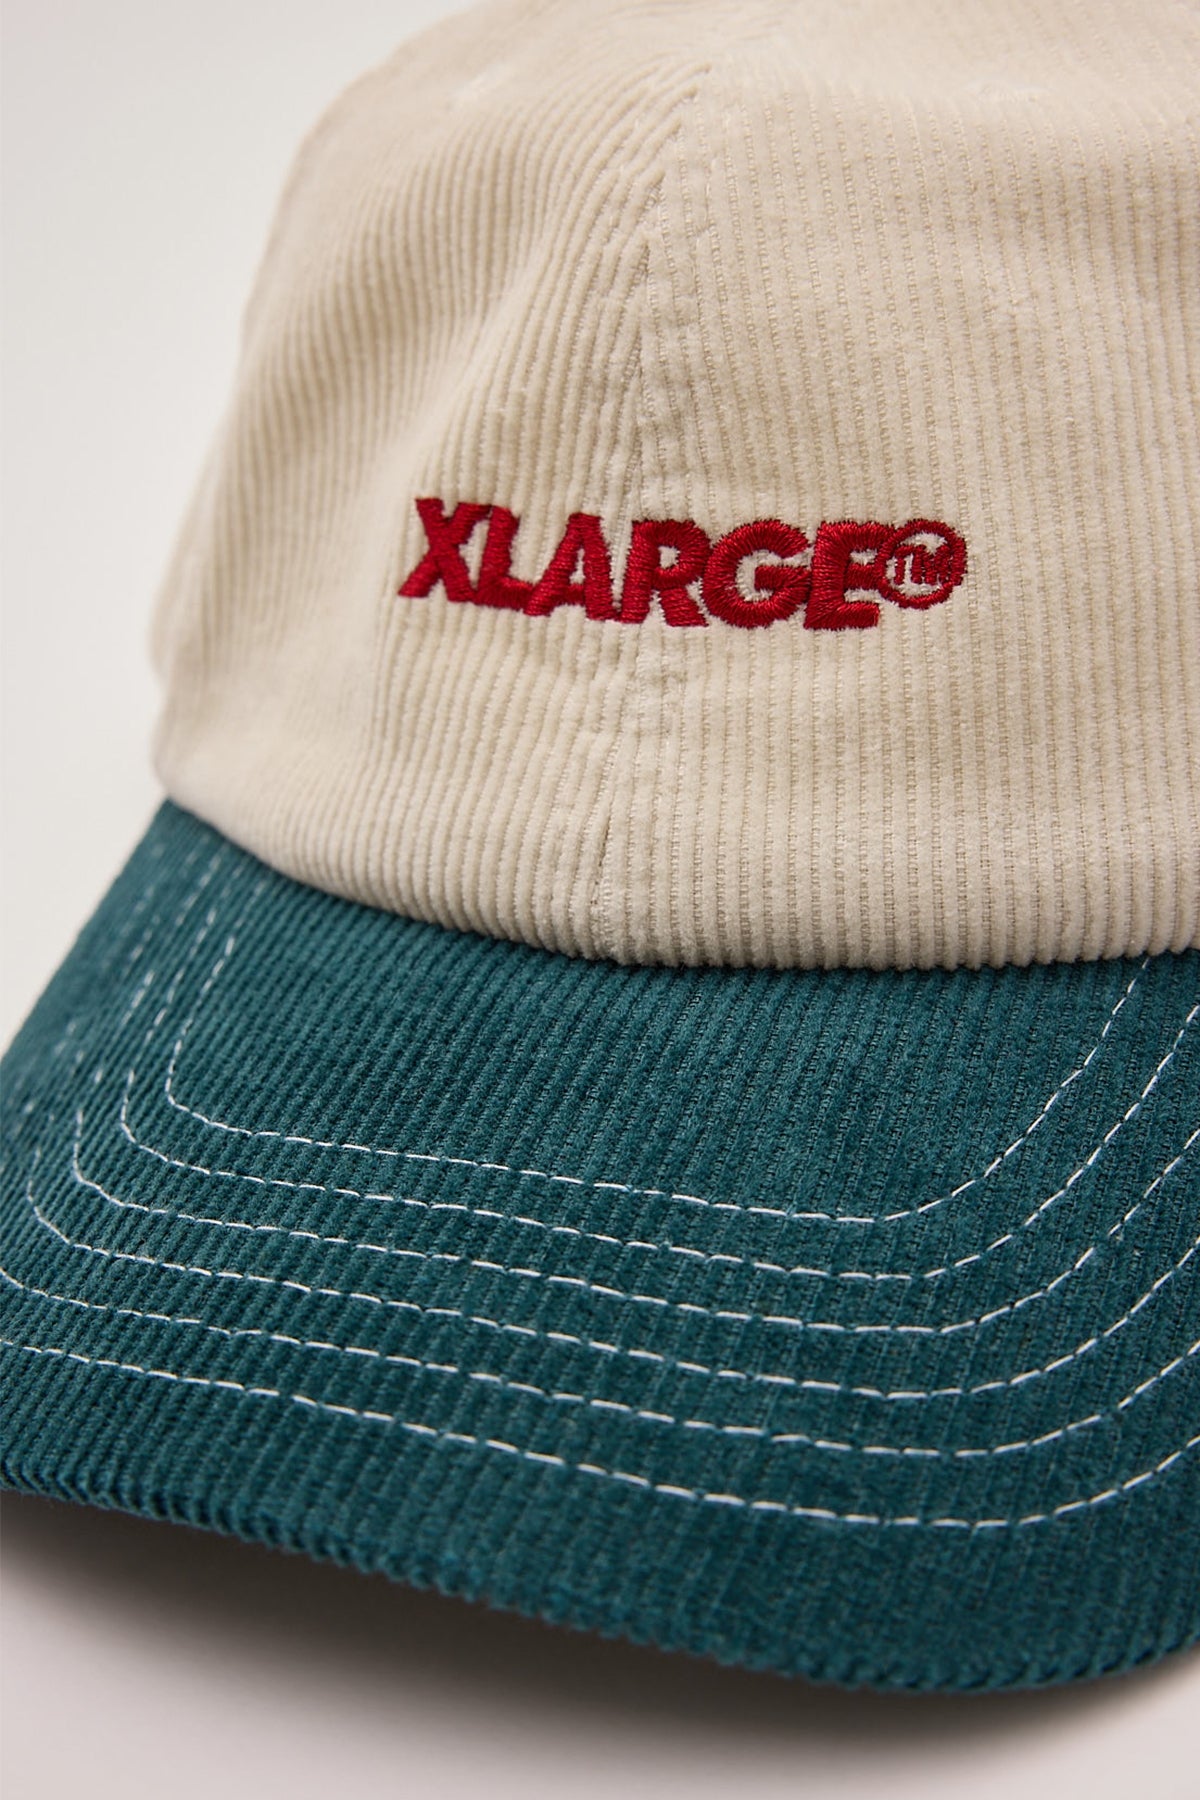 Xlarge Italic Cord Low Pro Cap Forest